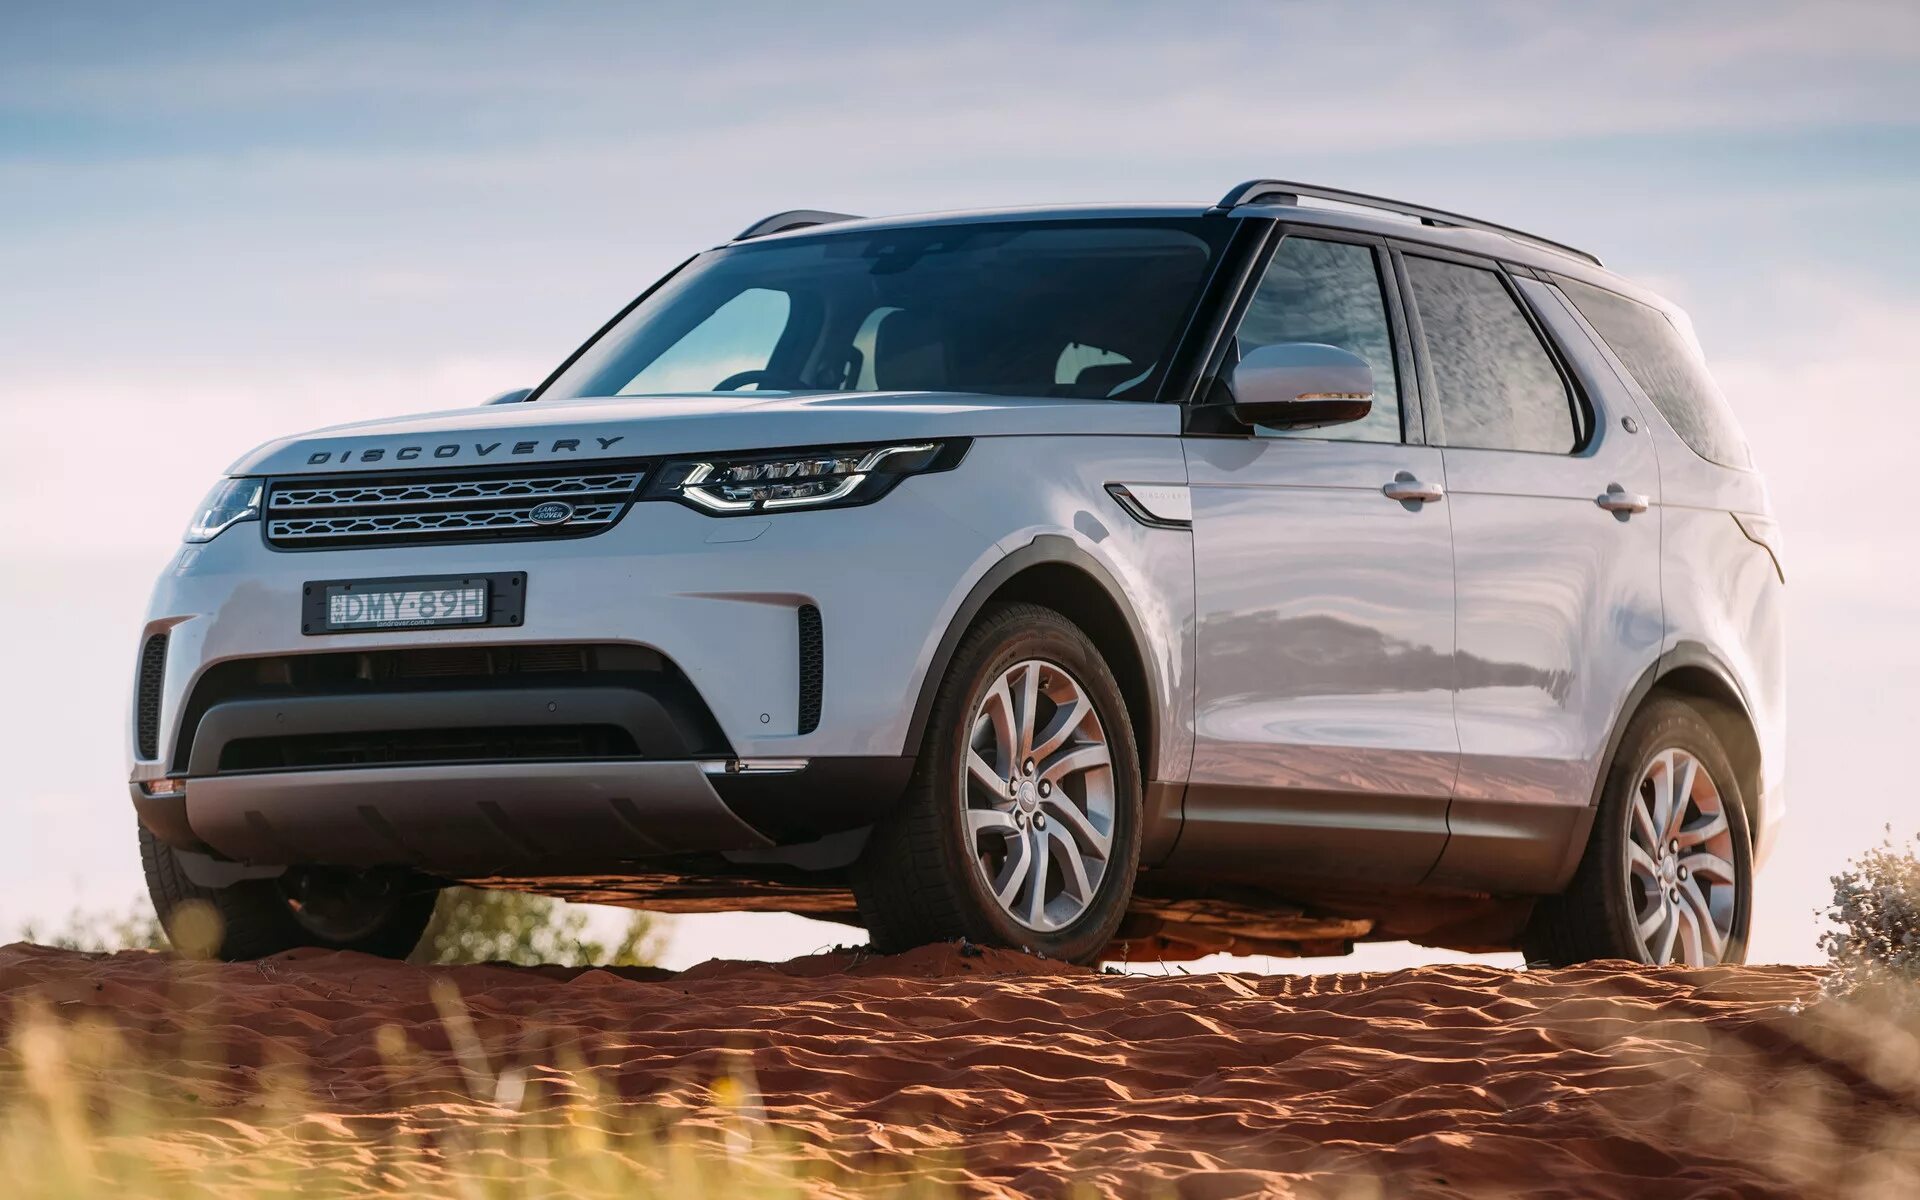 Дискавери 18. Land Rover Discovery 2022. Ленд Ровер Discovery 2017. Ленд Ровер Дискавери 4 2017. Ленд Ровер Дискавери 2021.